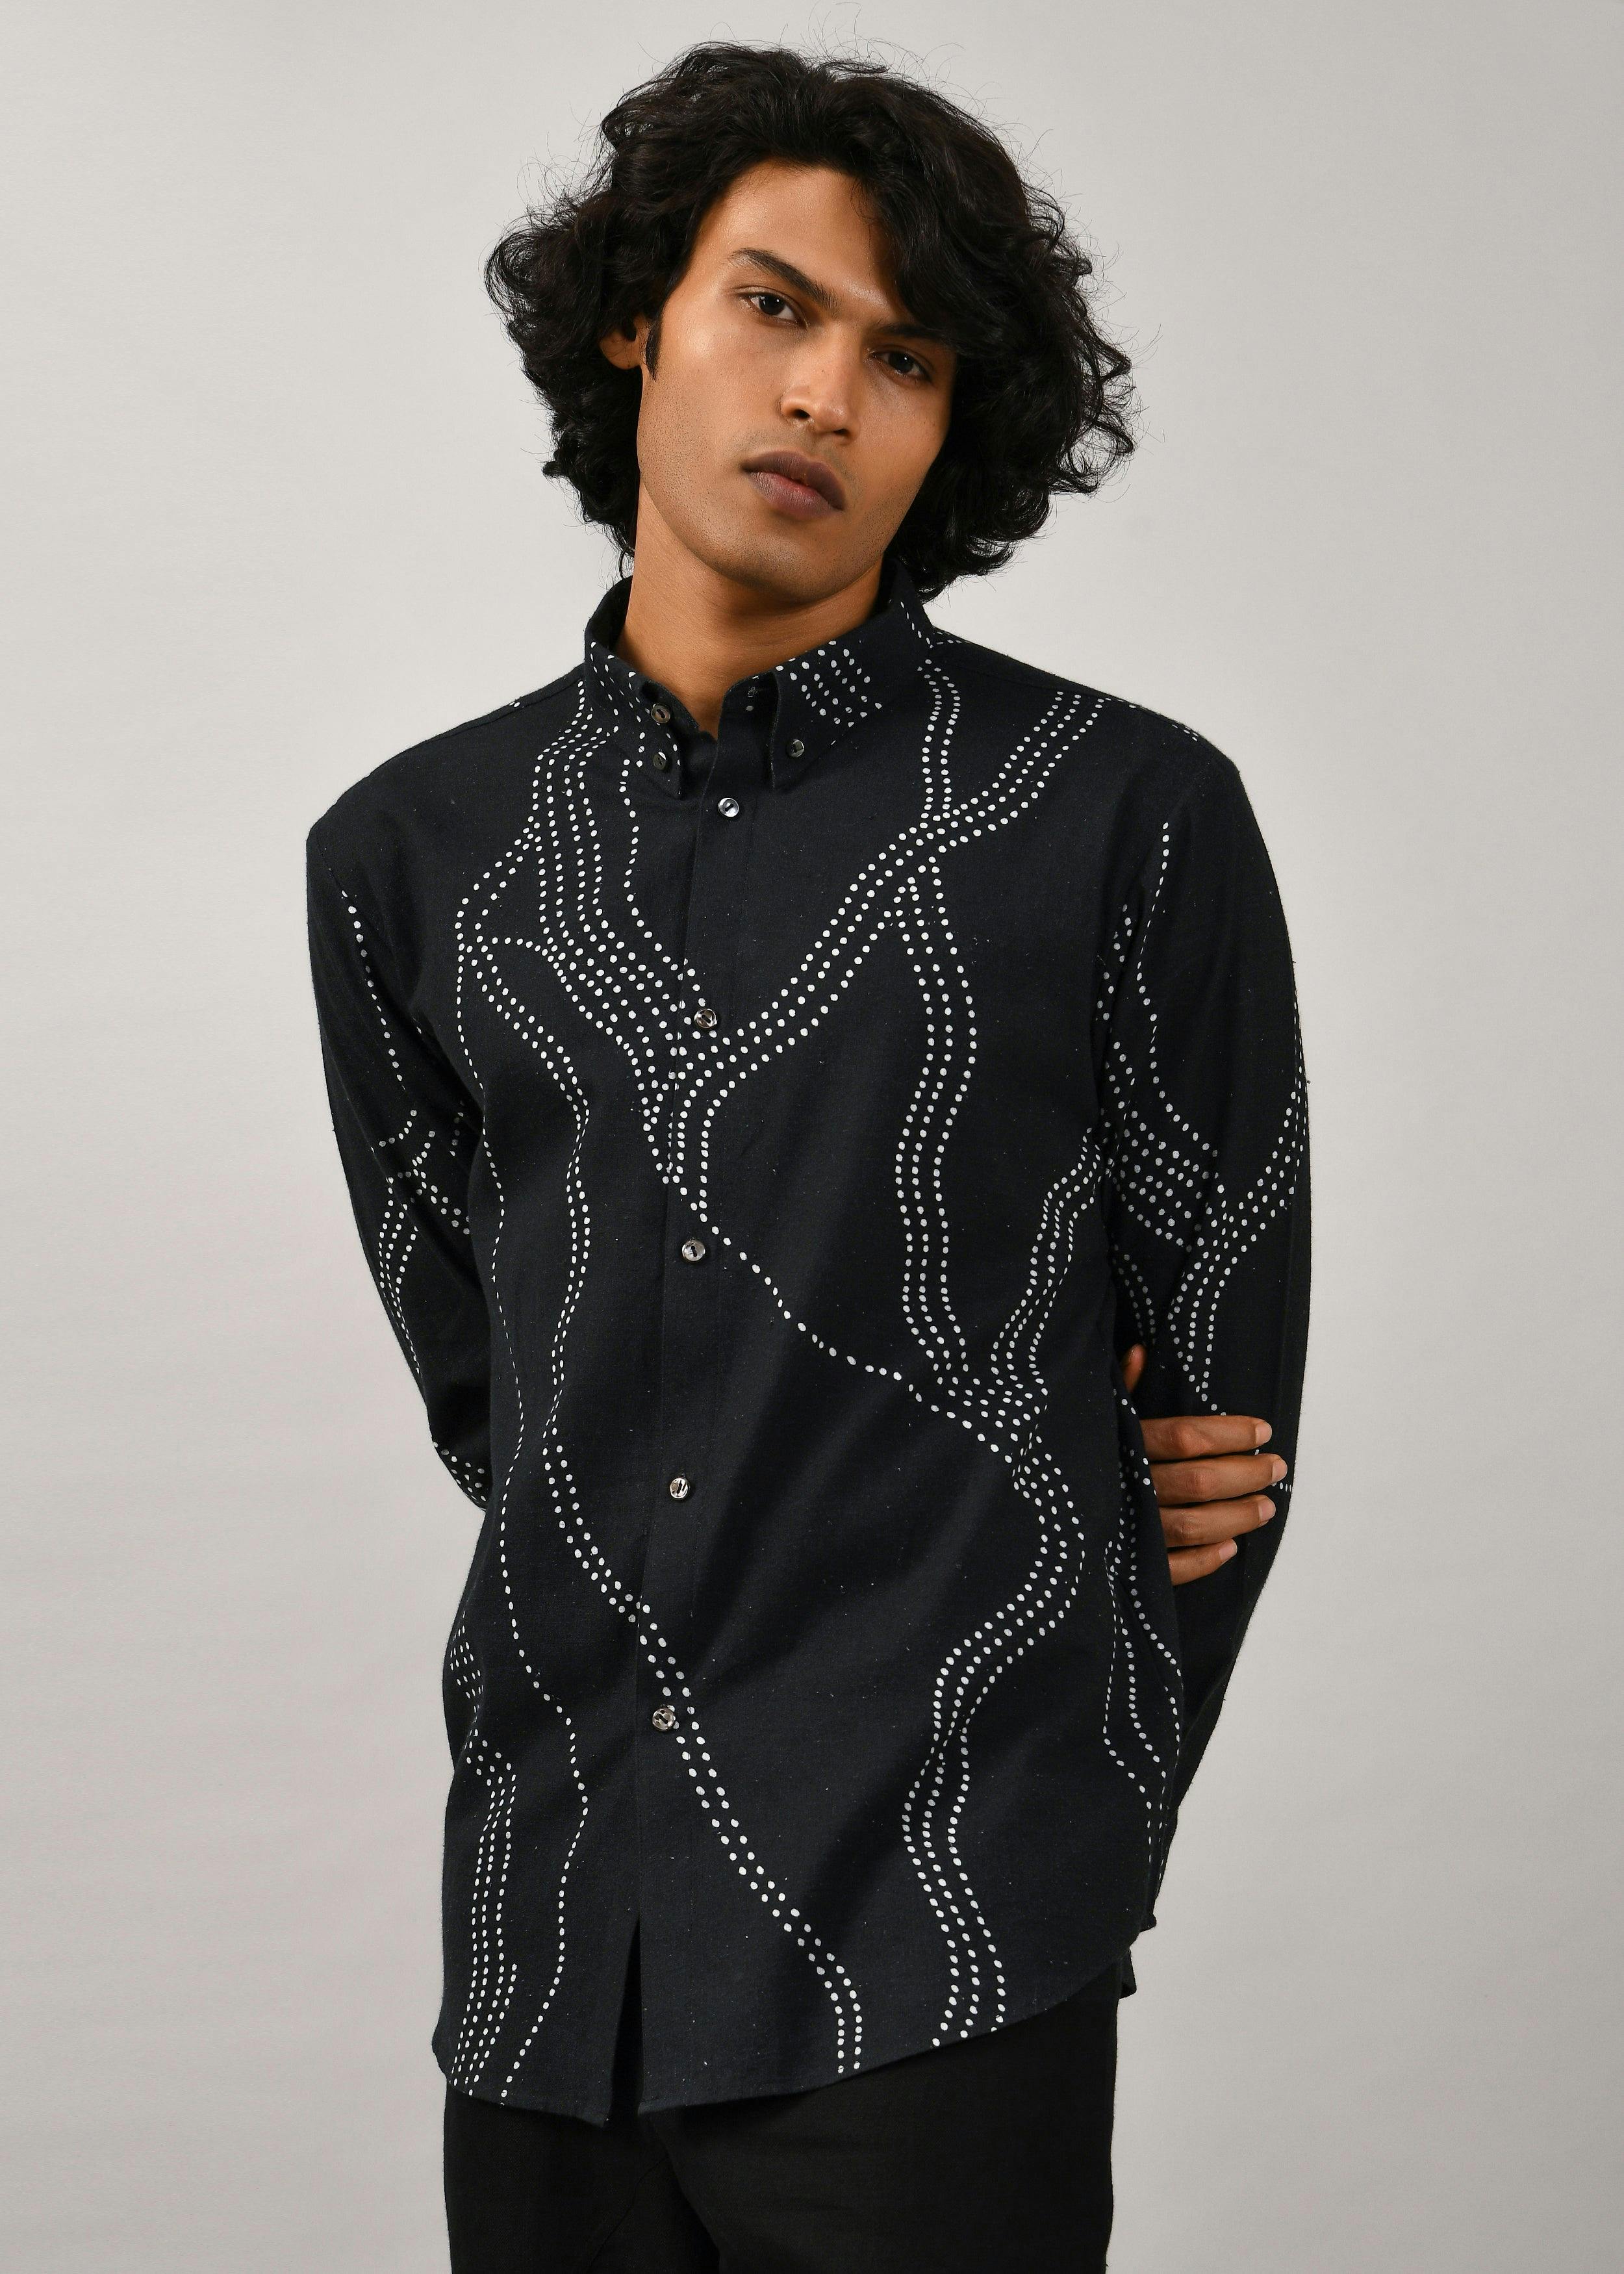 Constellation Print Shirt, a product by Country Made